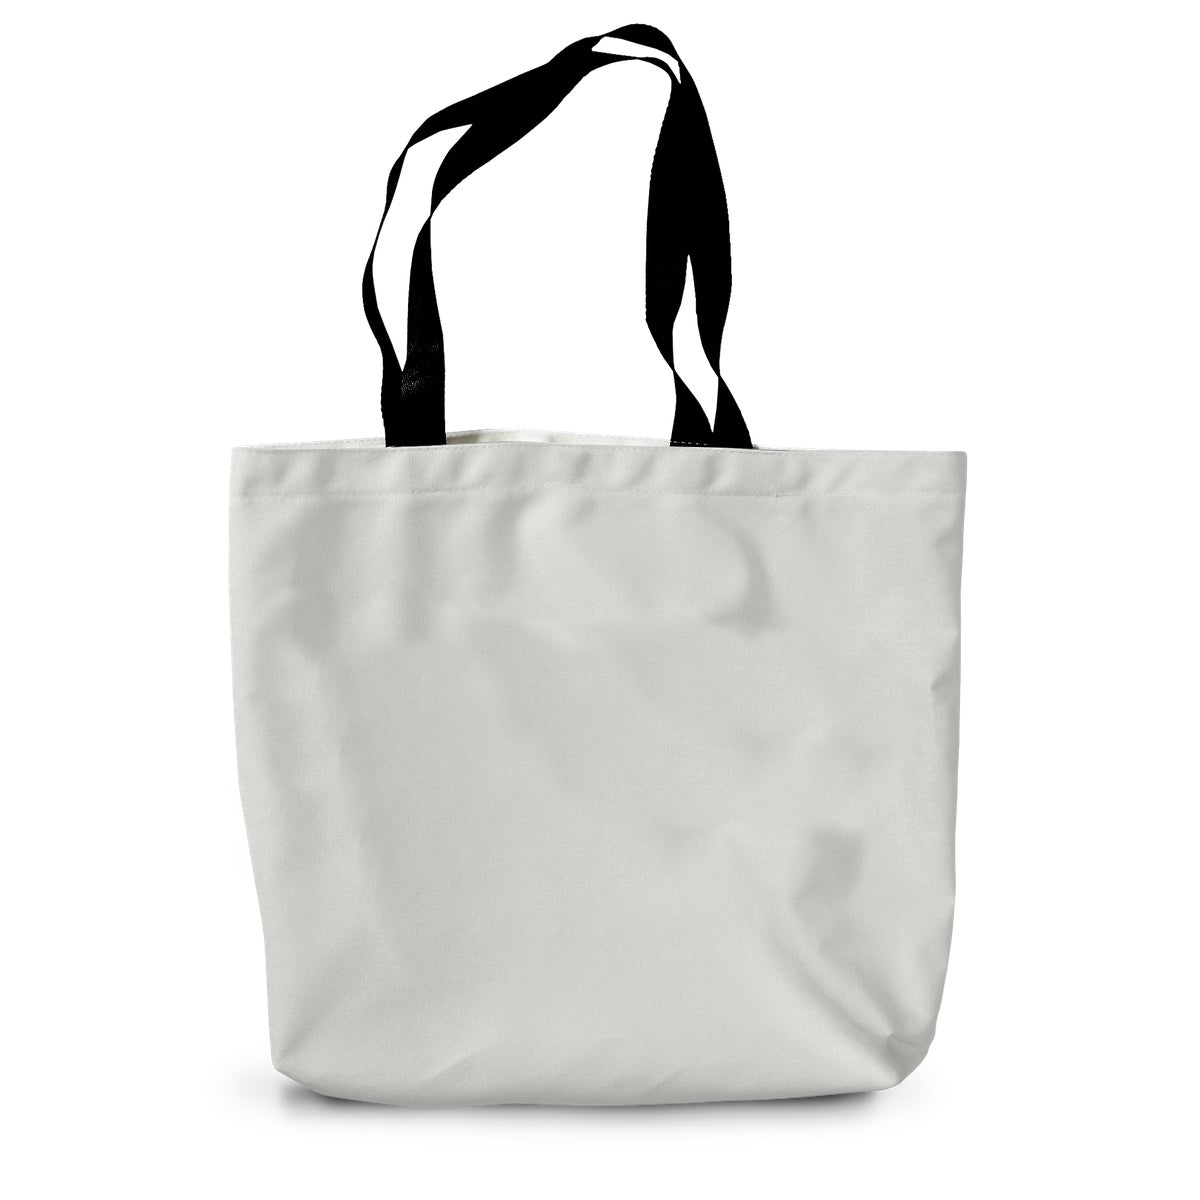 Indian 6 Canvas Tote Bag